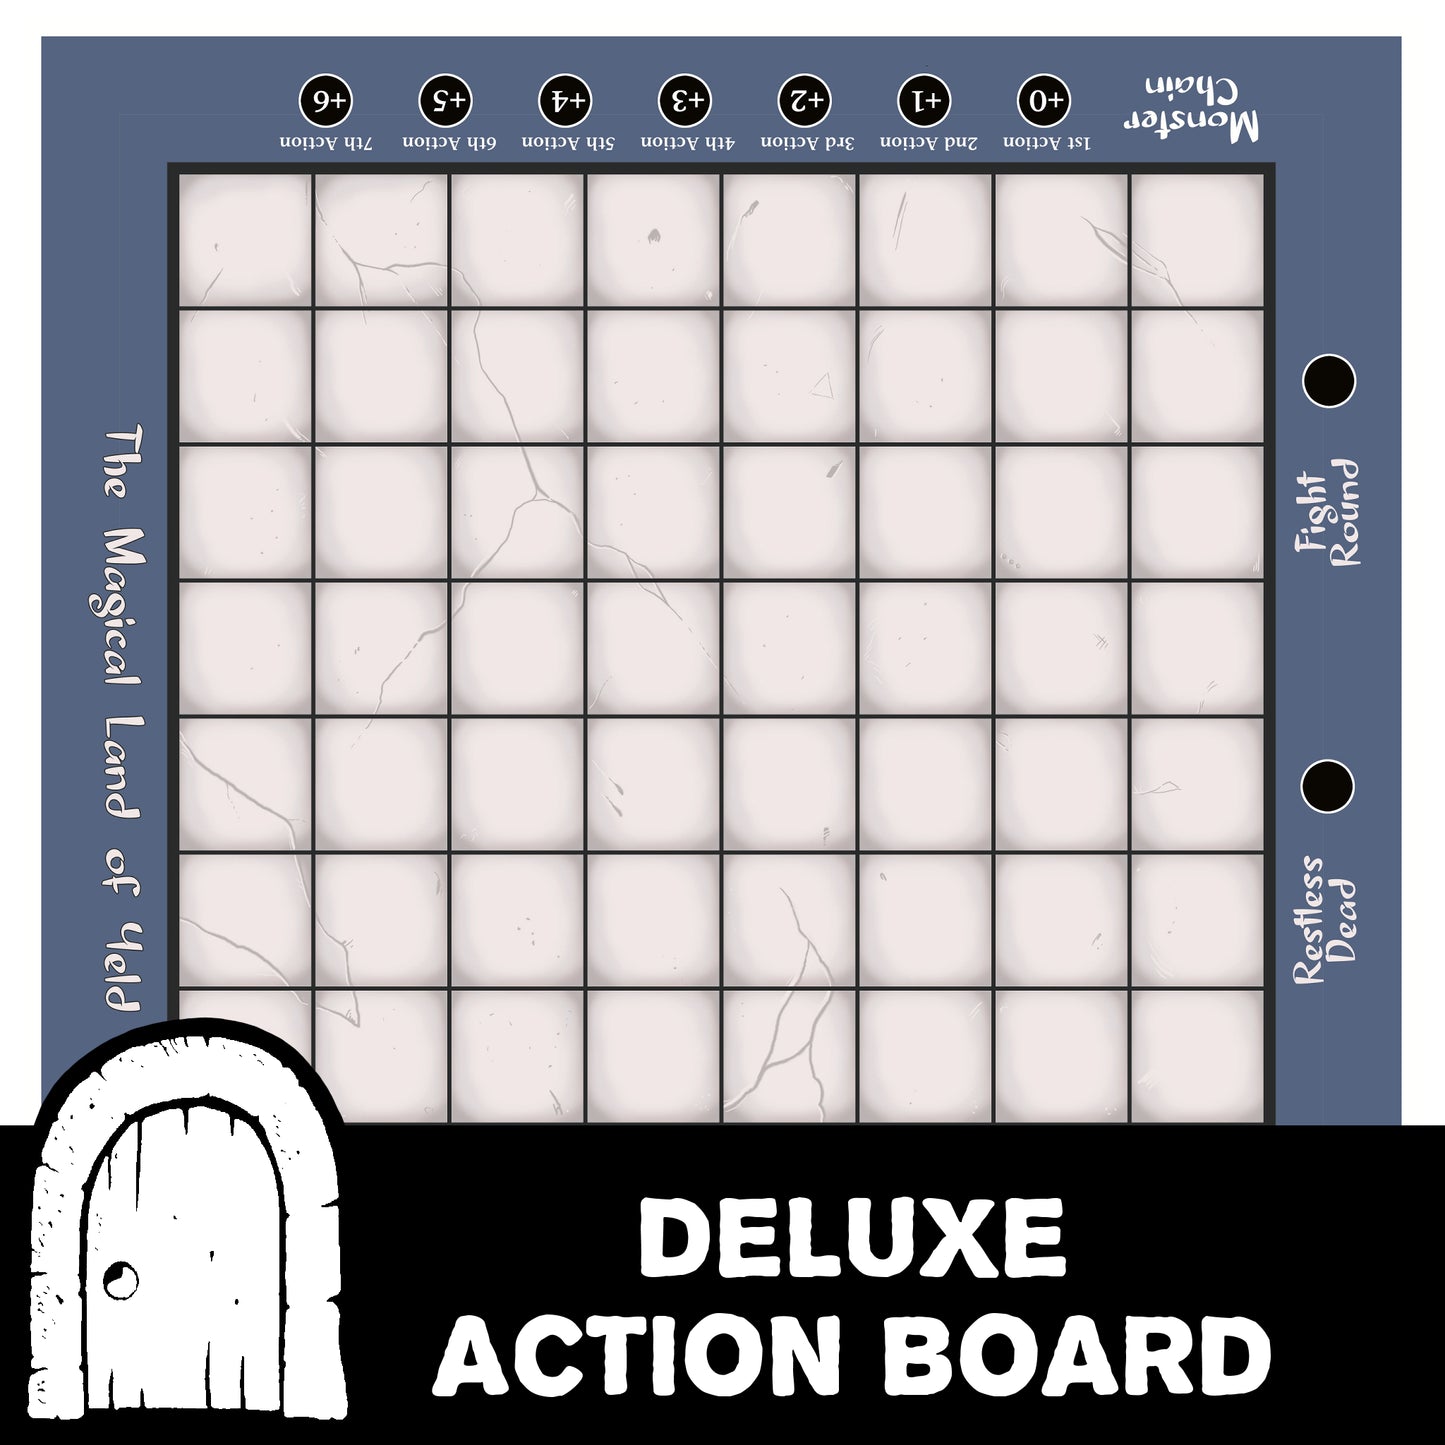 Deluxe Action Board